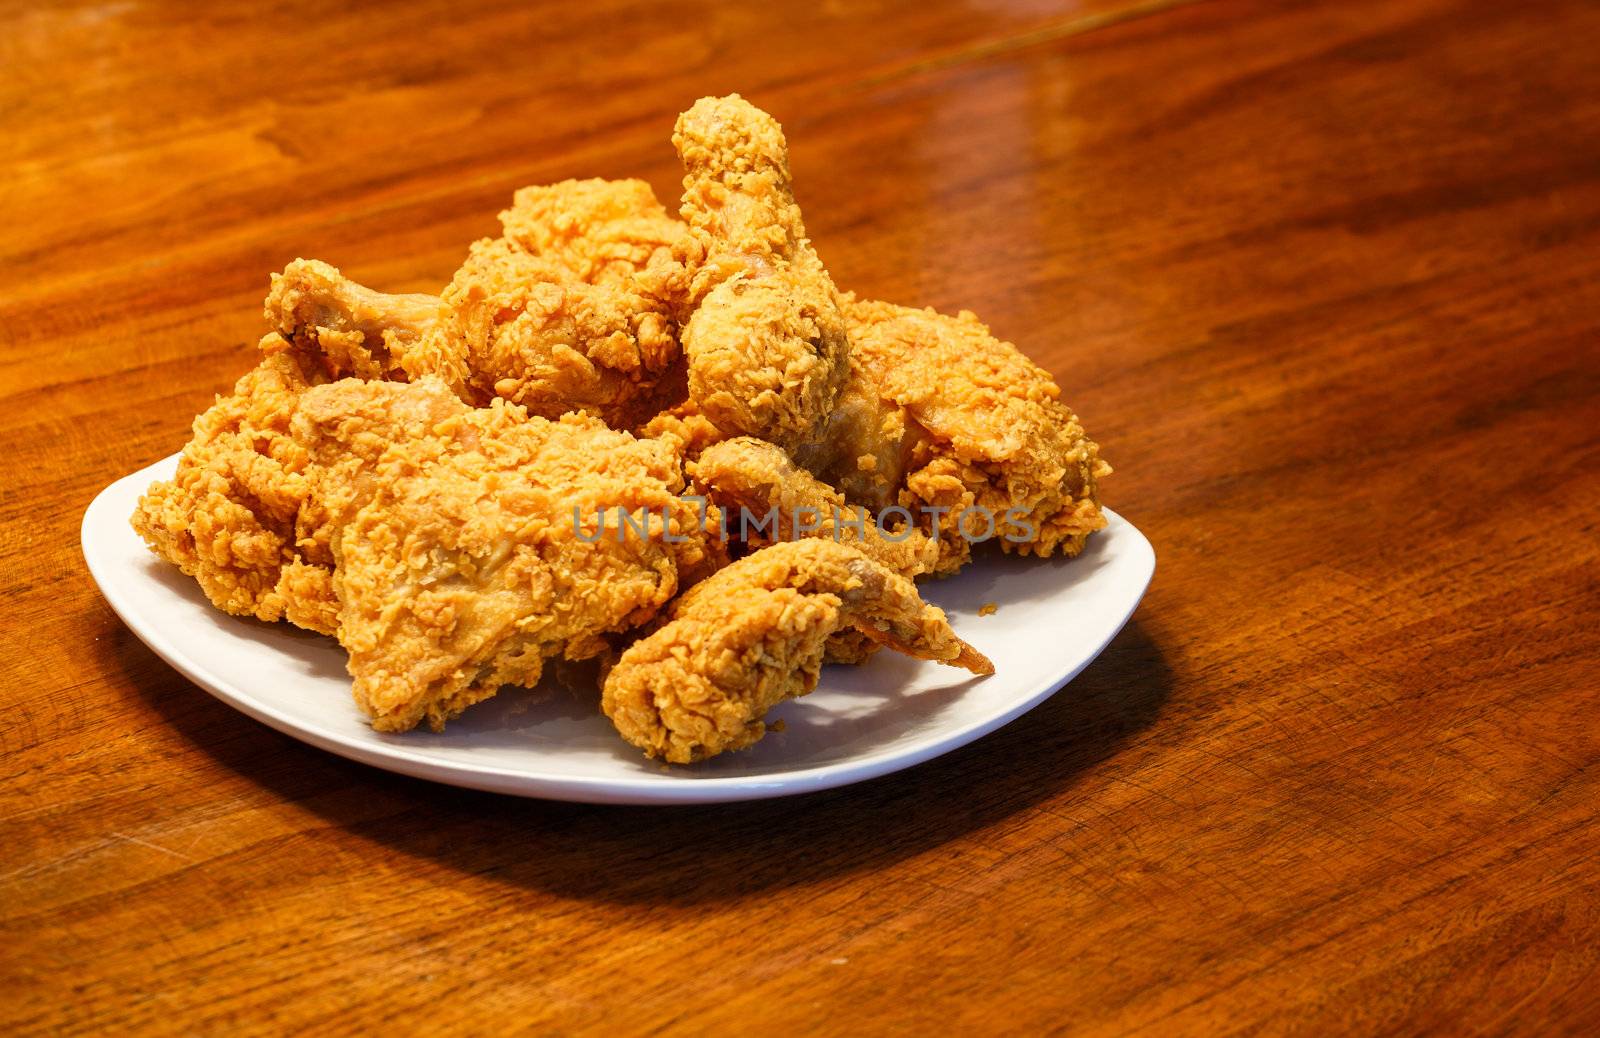 Fresh, fried chicken on a square white plate on a wood table